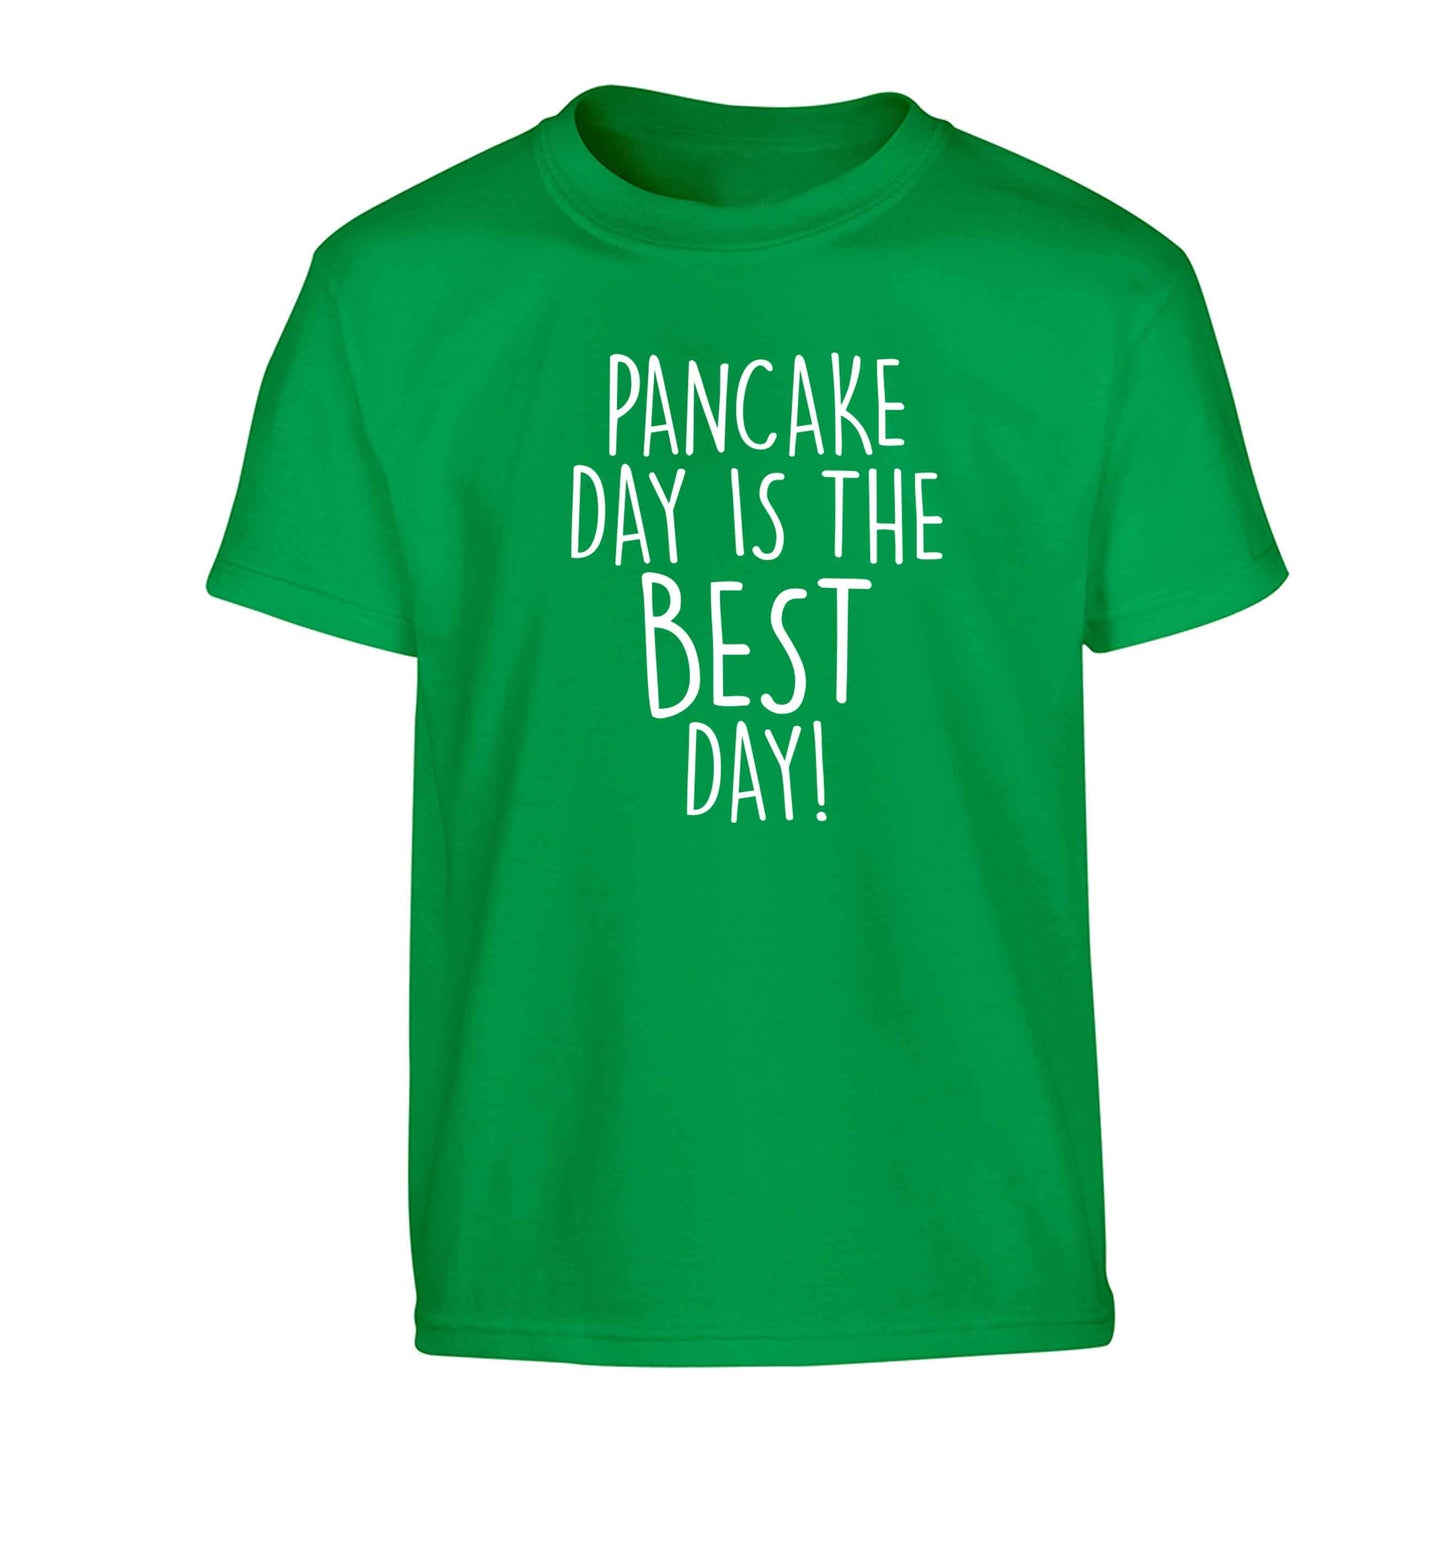 Pancake day is the best day Children's green Tshirt 12-13 Years